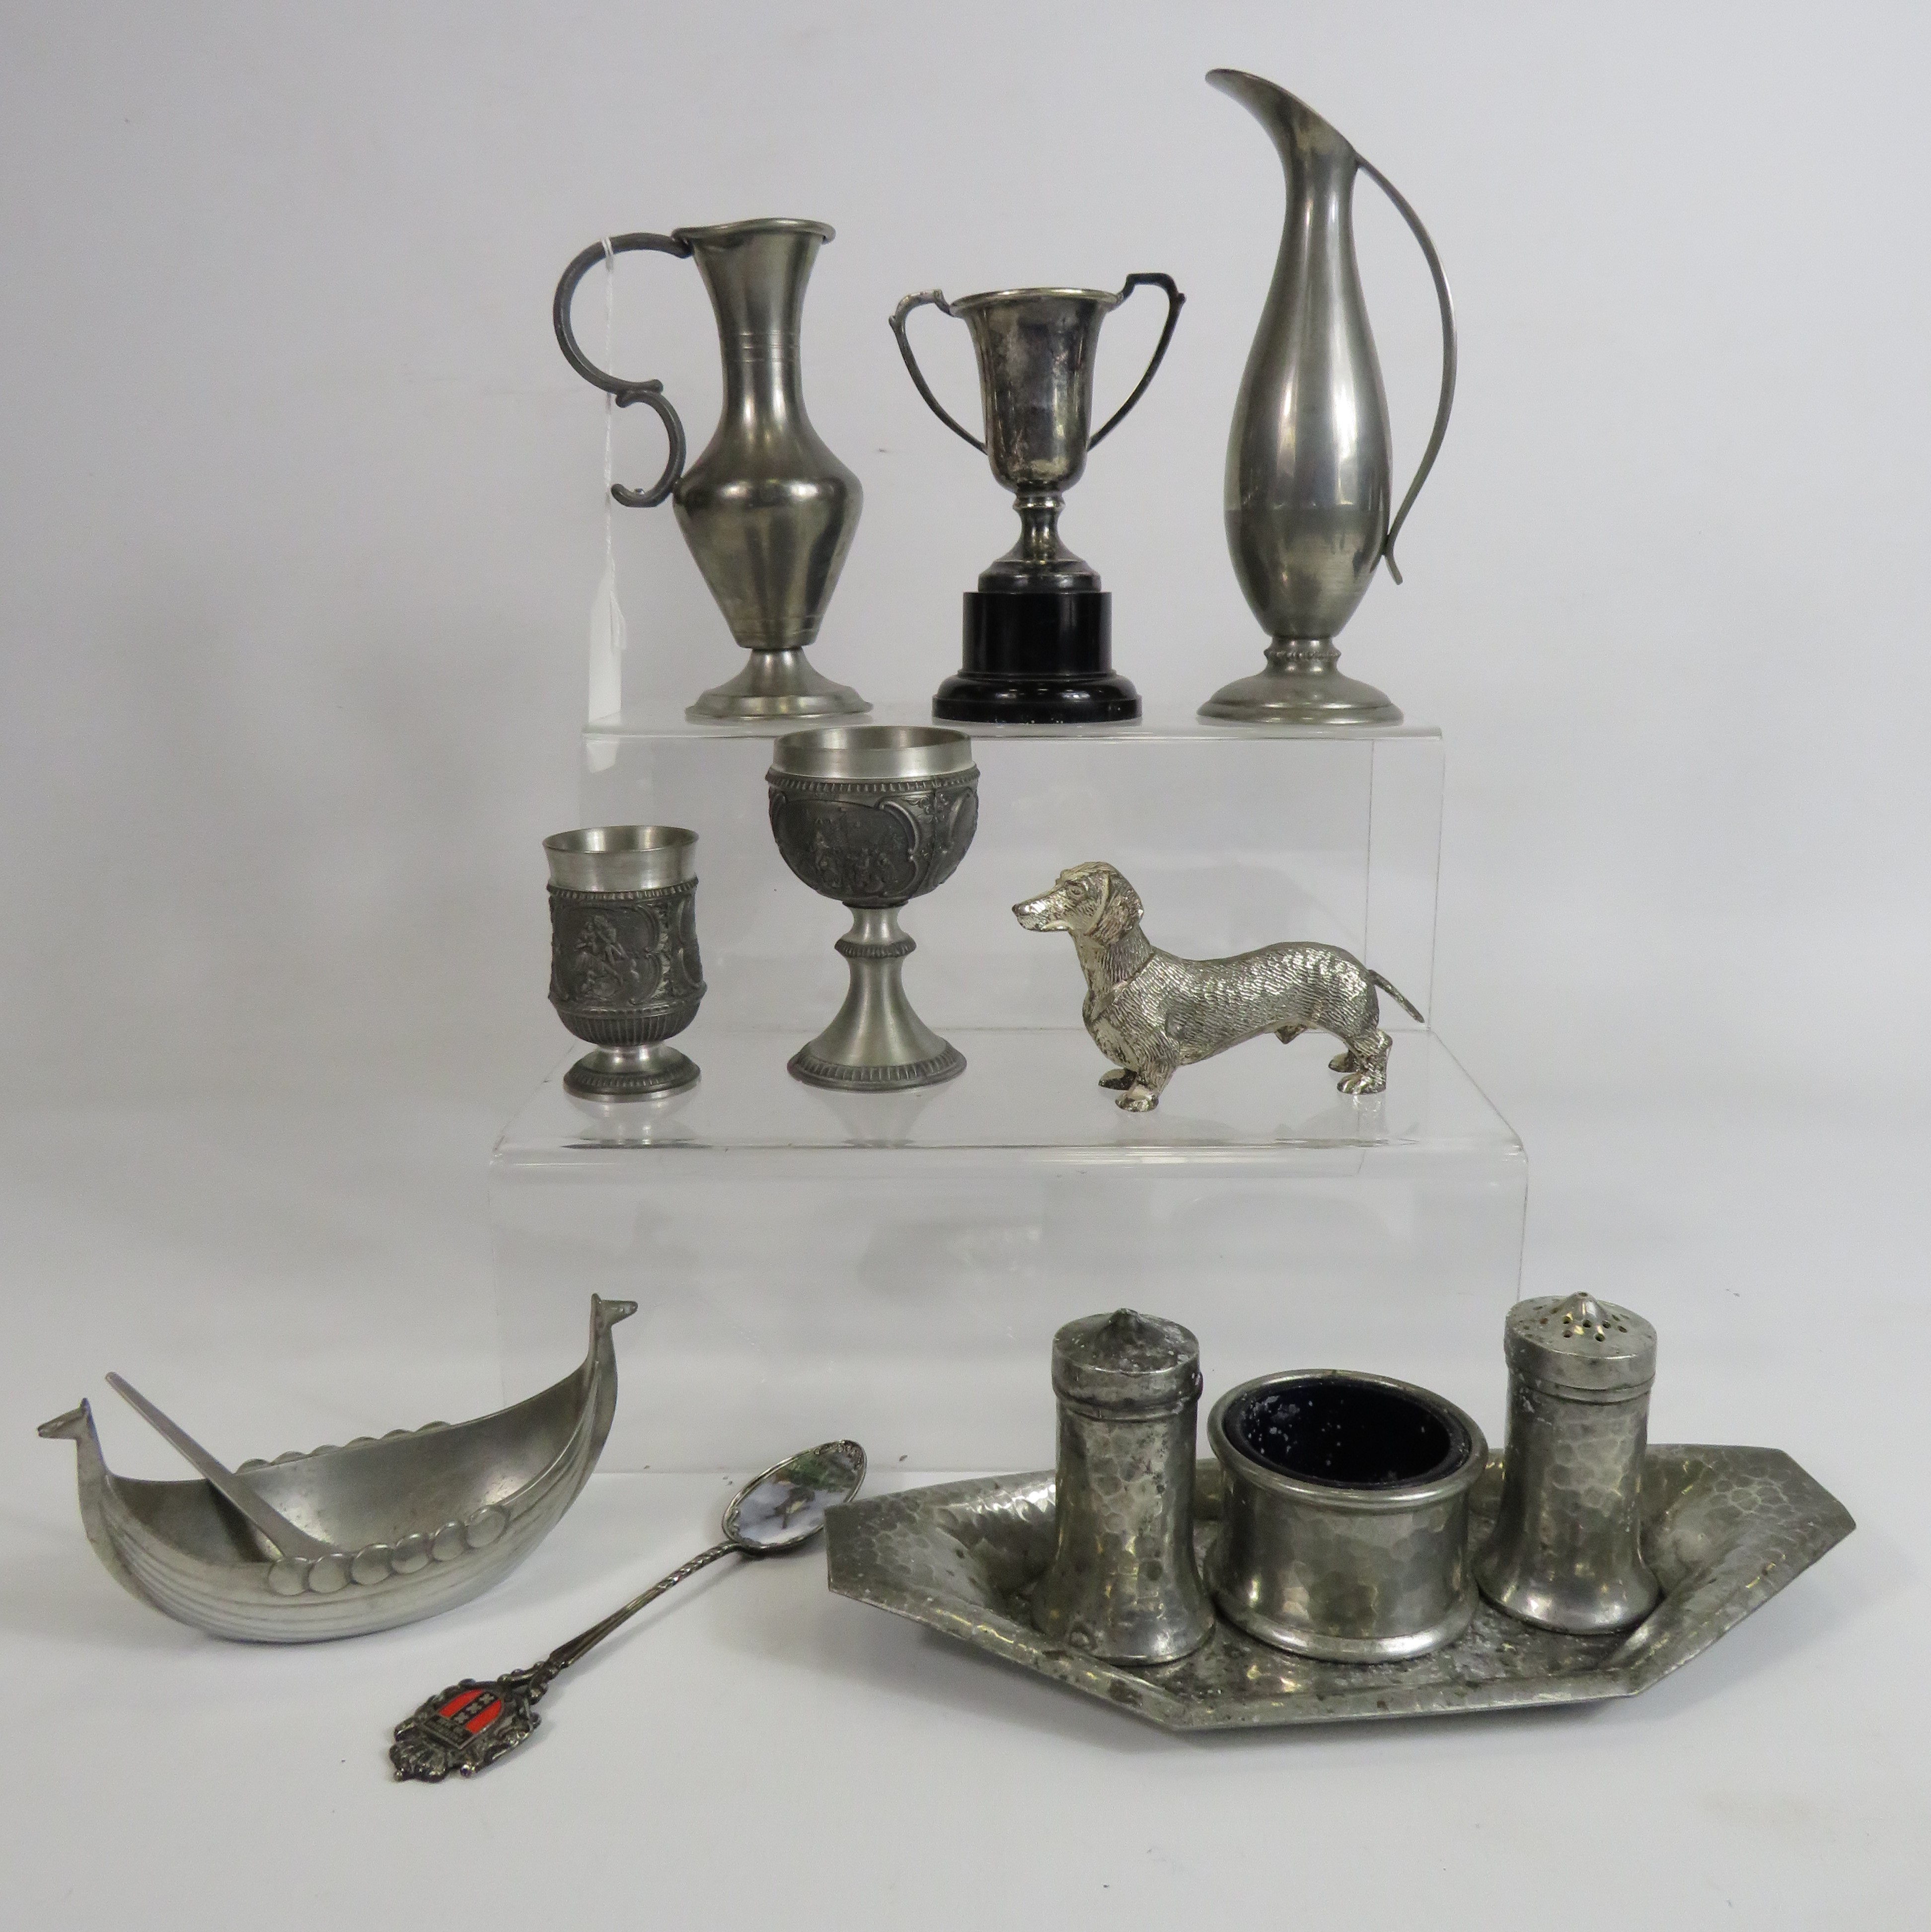 Selection of various Silver plated and pewter items, some which are Danish.